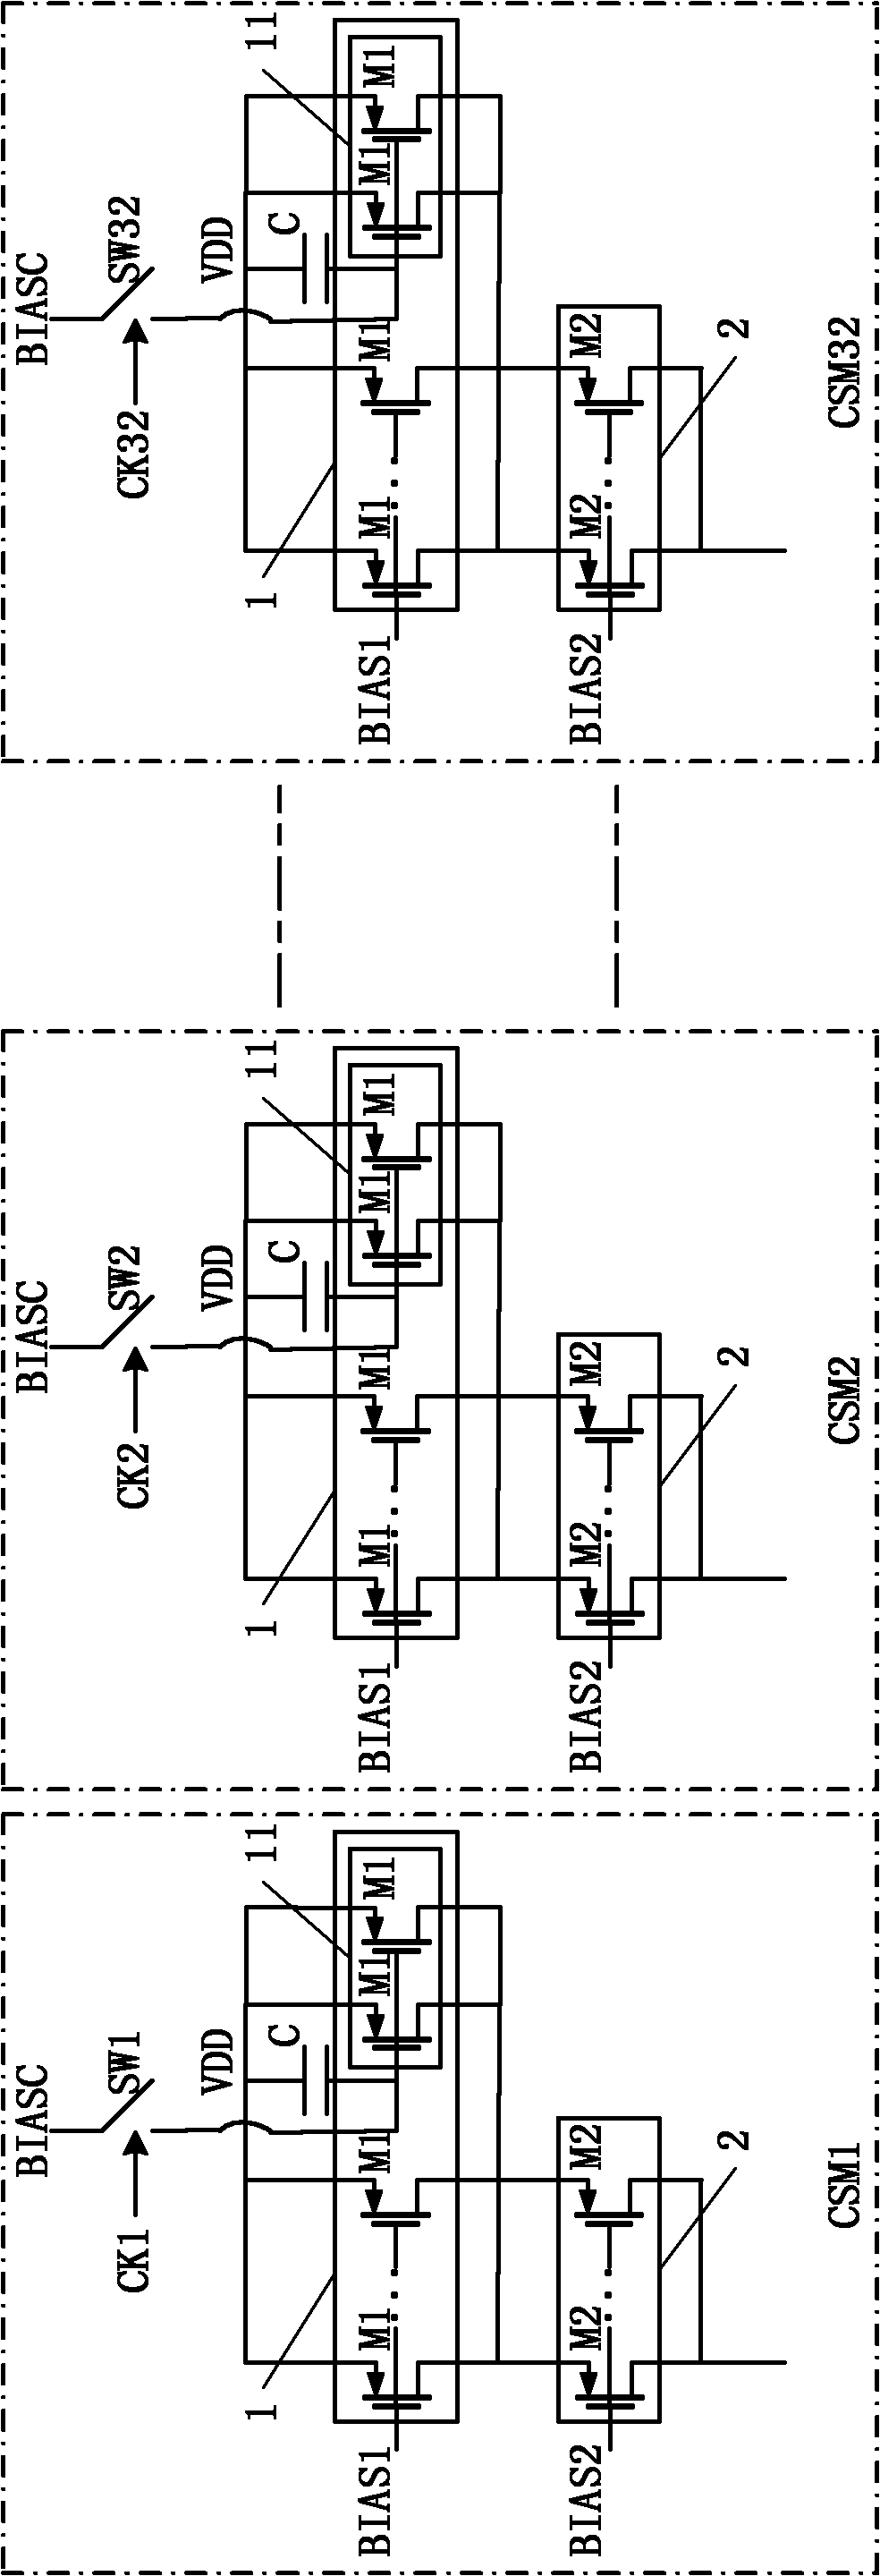 Dynamic correction circuit for current source of current-steering digital-to-analog convertor